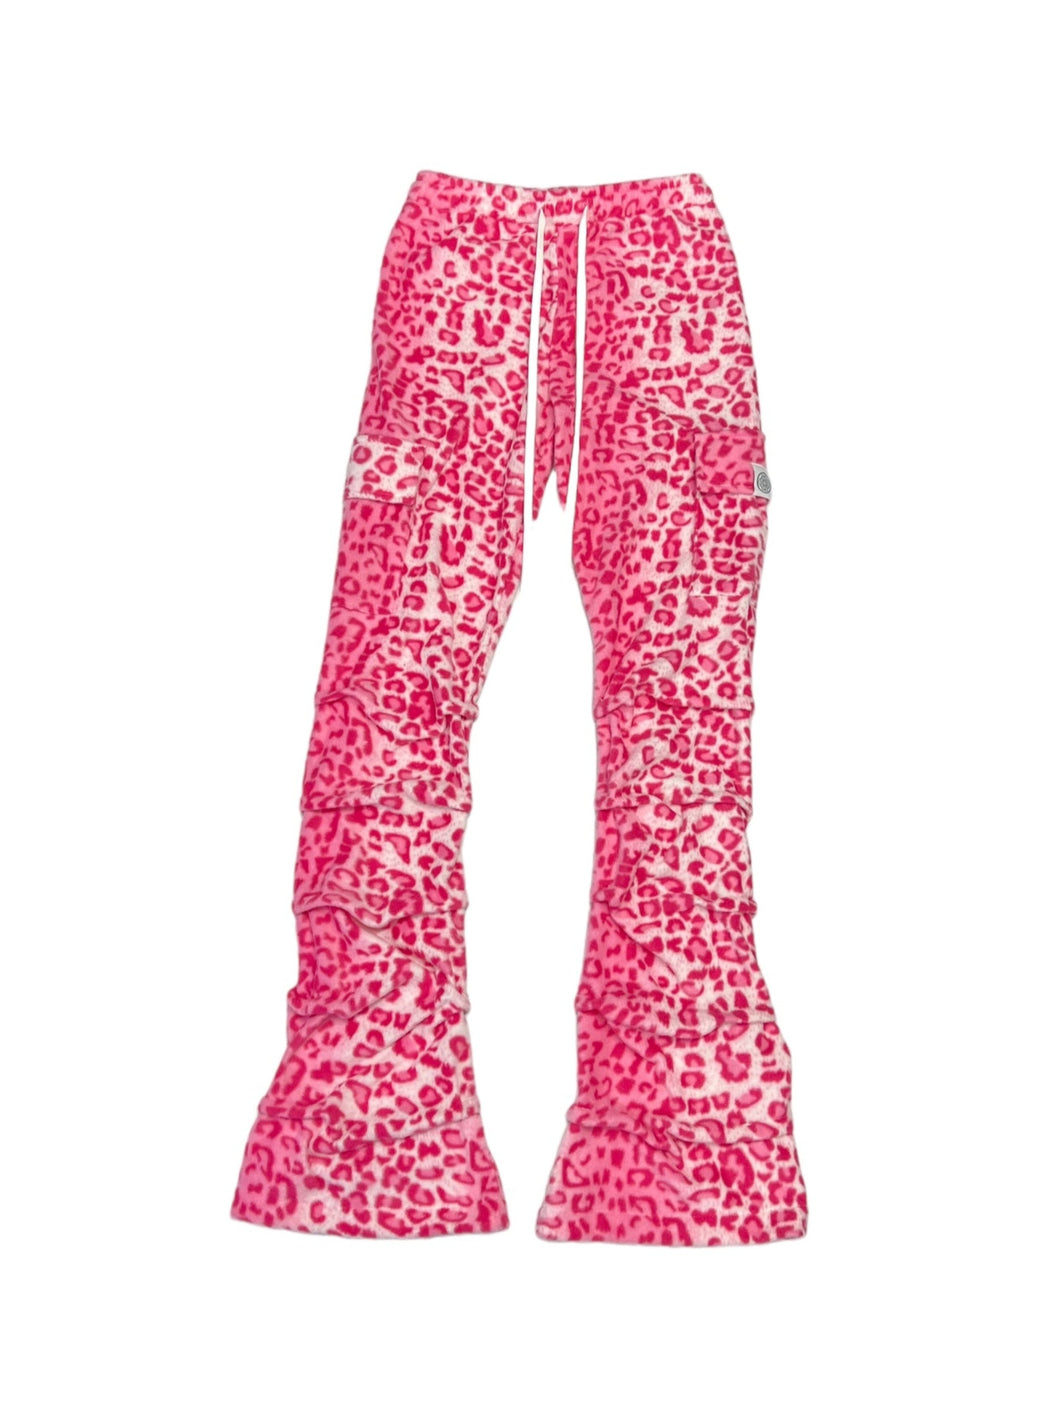 PINK AND WHITE LEOPARD STACK PANTS (Womens sizes)